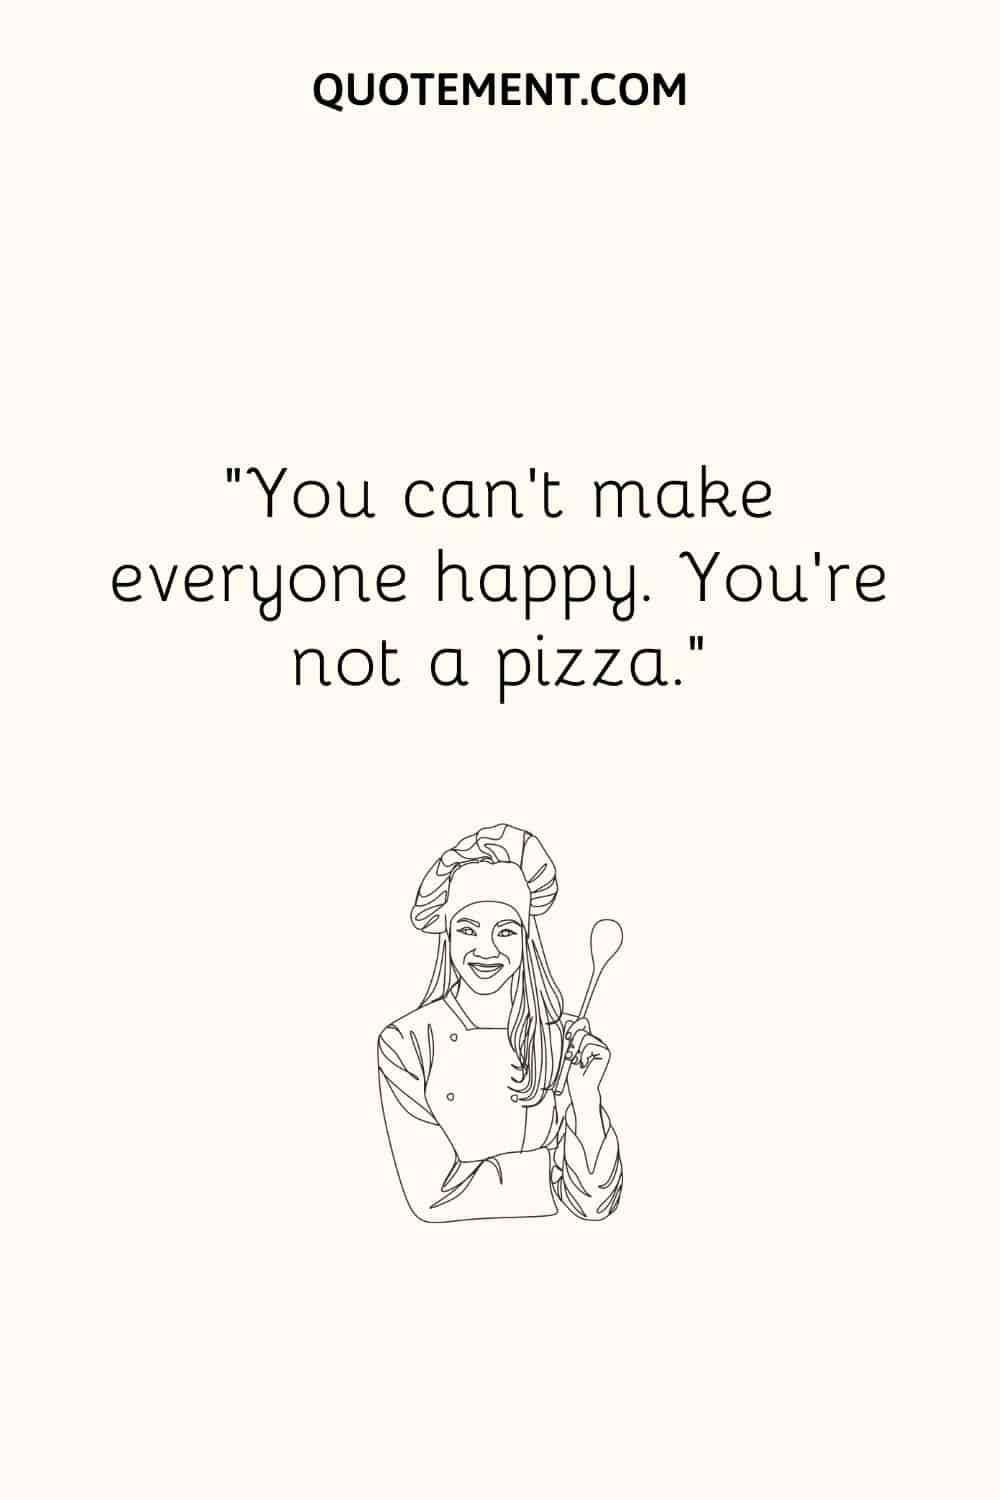 You can’t make everyone happy. You’re not a pizza